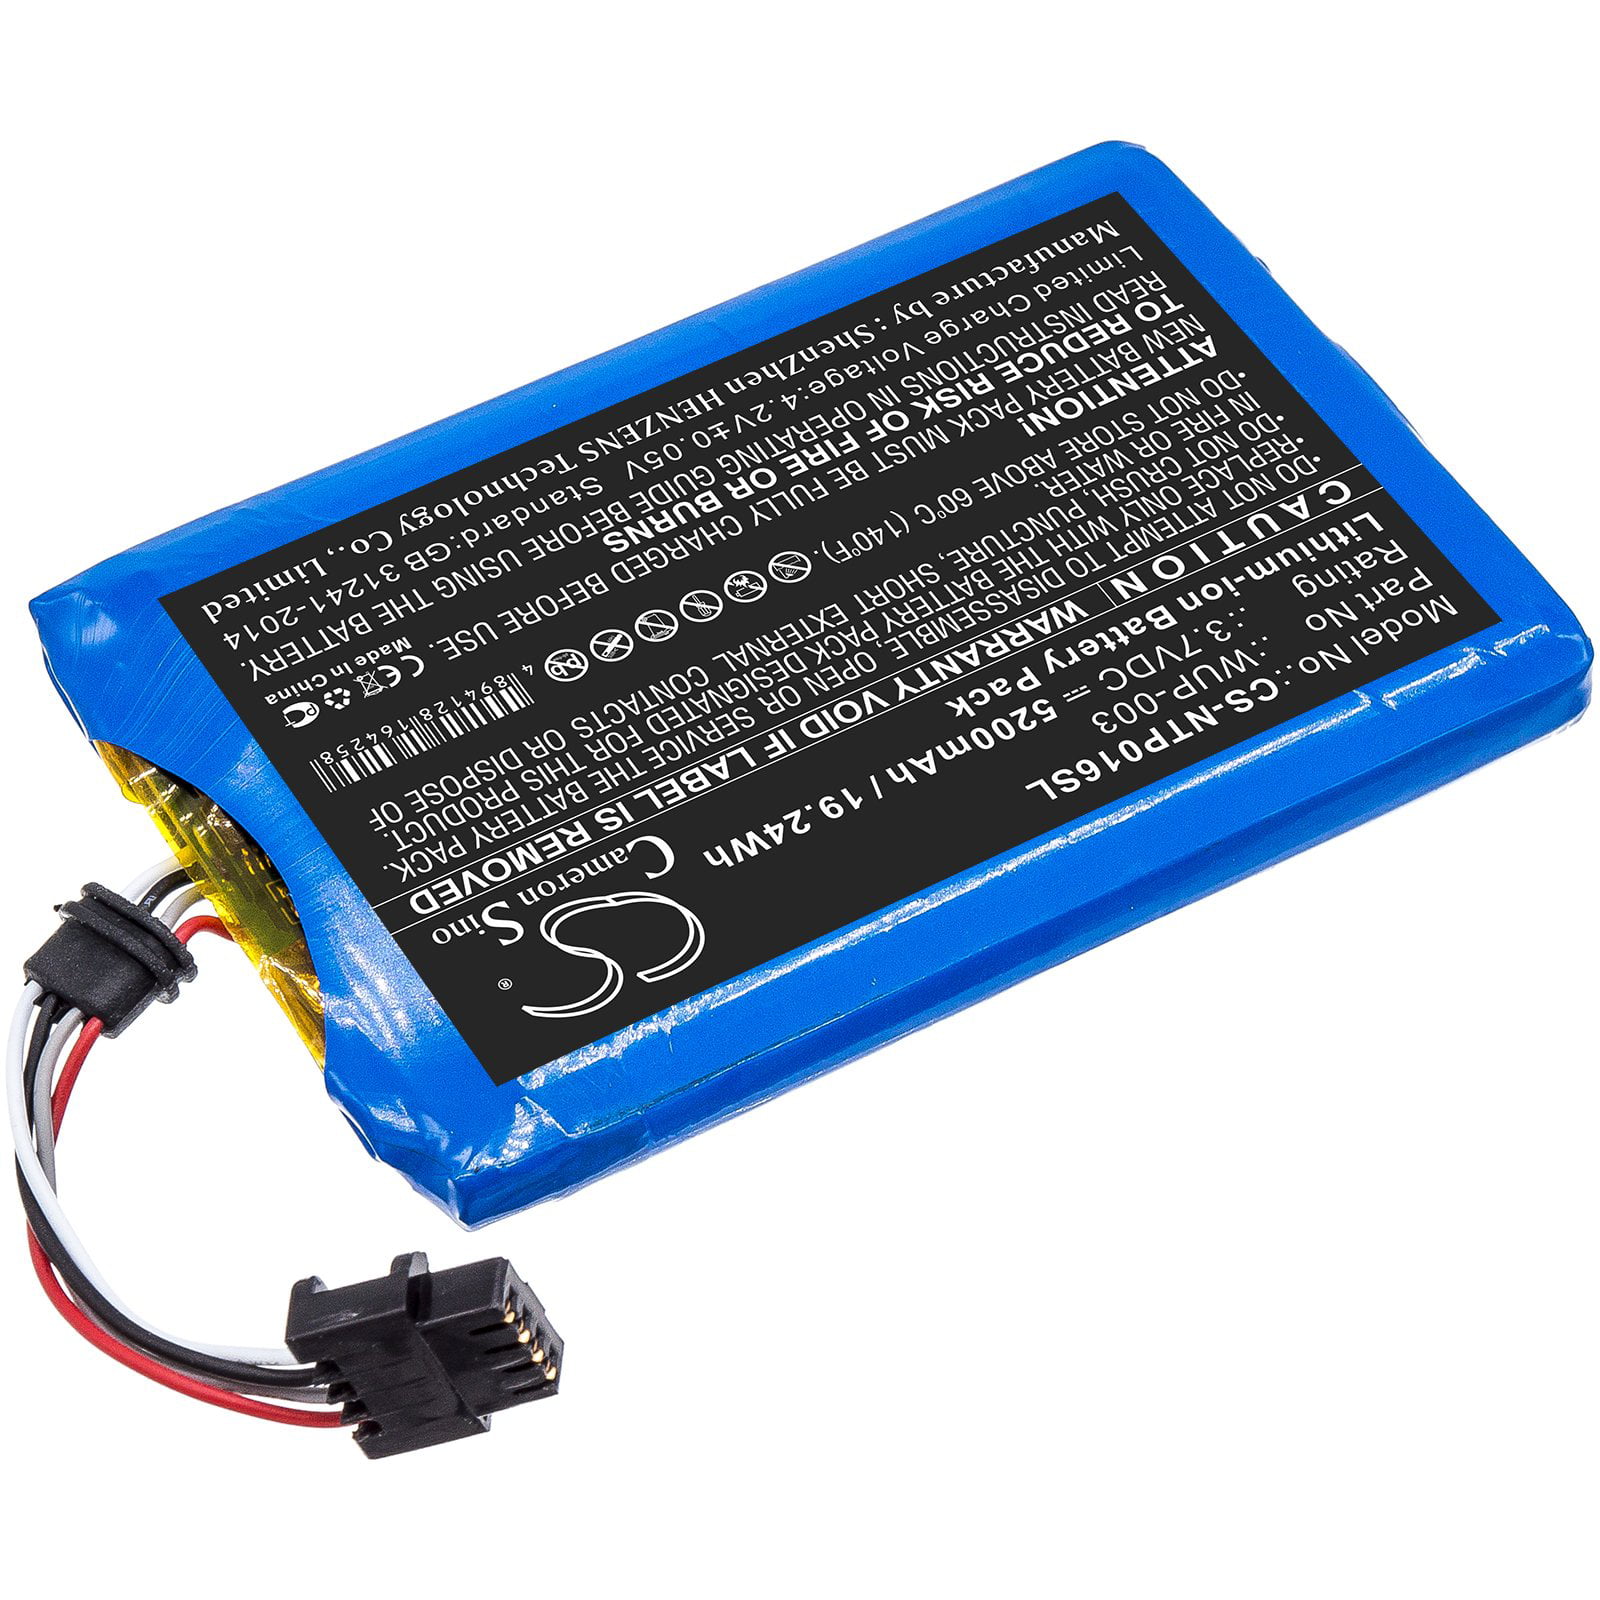 Transparant Optimisme Voorverkoop ARR-002, WUP-002 High Capacity Battery for Nintendo Wii U 8G GamePad,  5200mAh - sold by smavco - Walmart.com